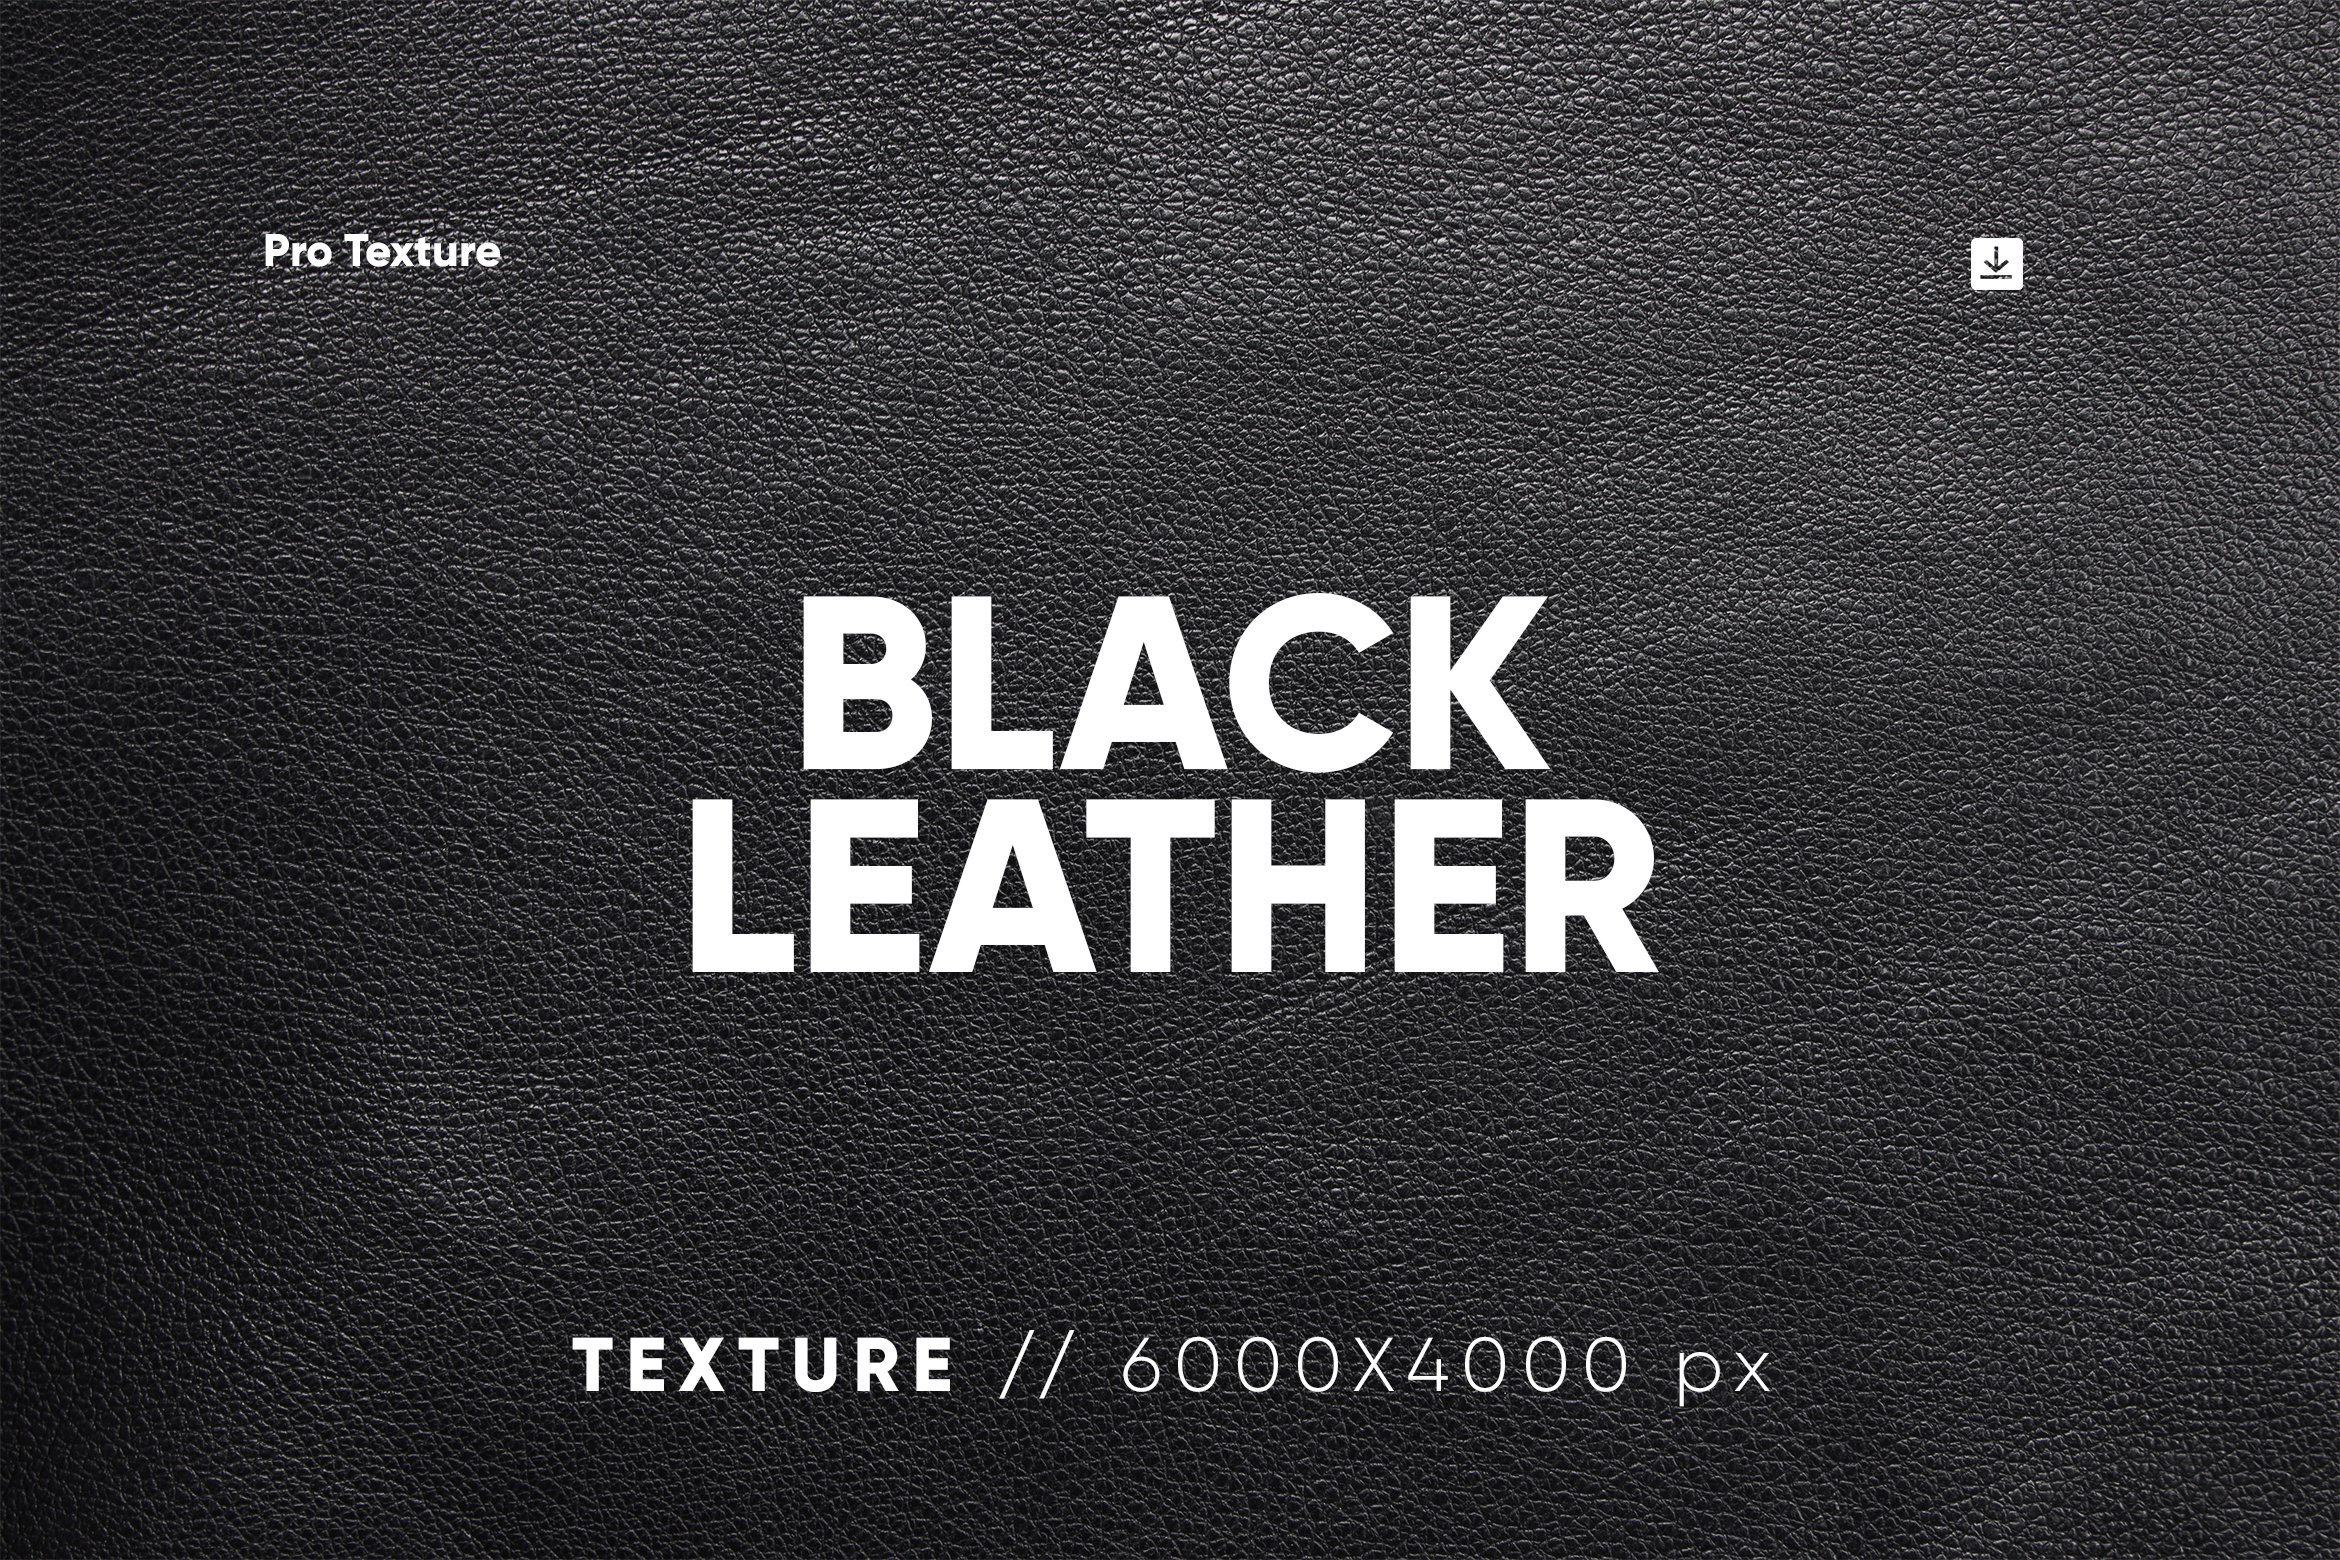 20 Black Leather Textures HQ cover image.